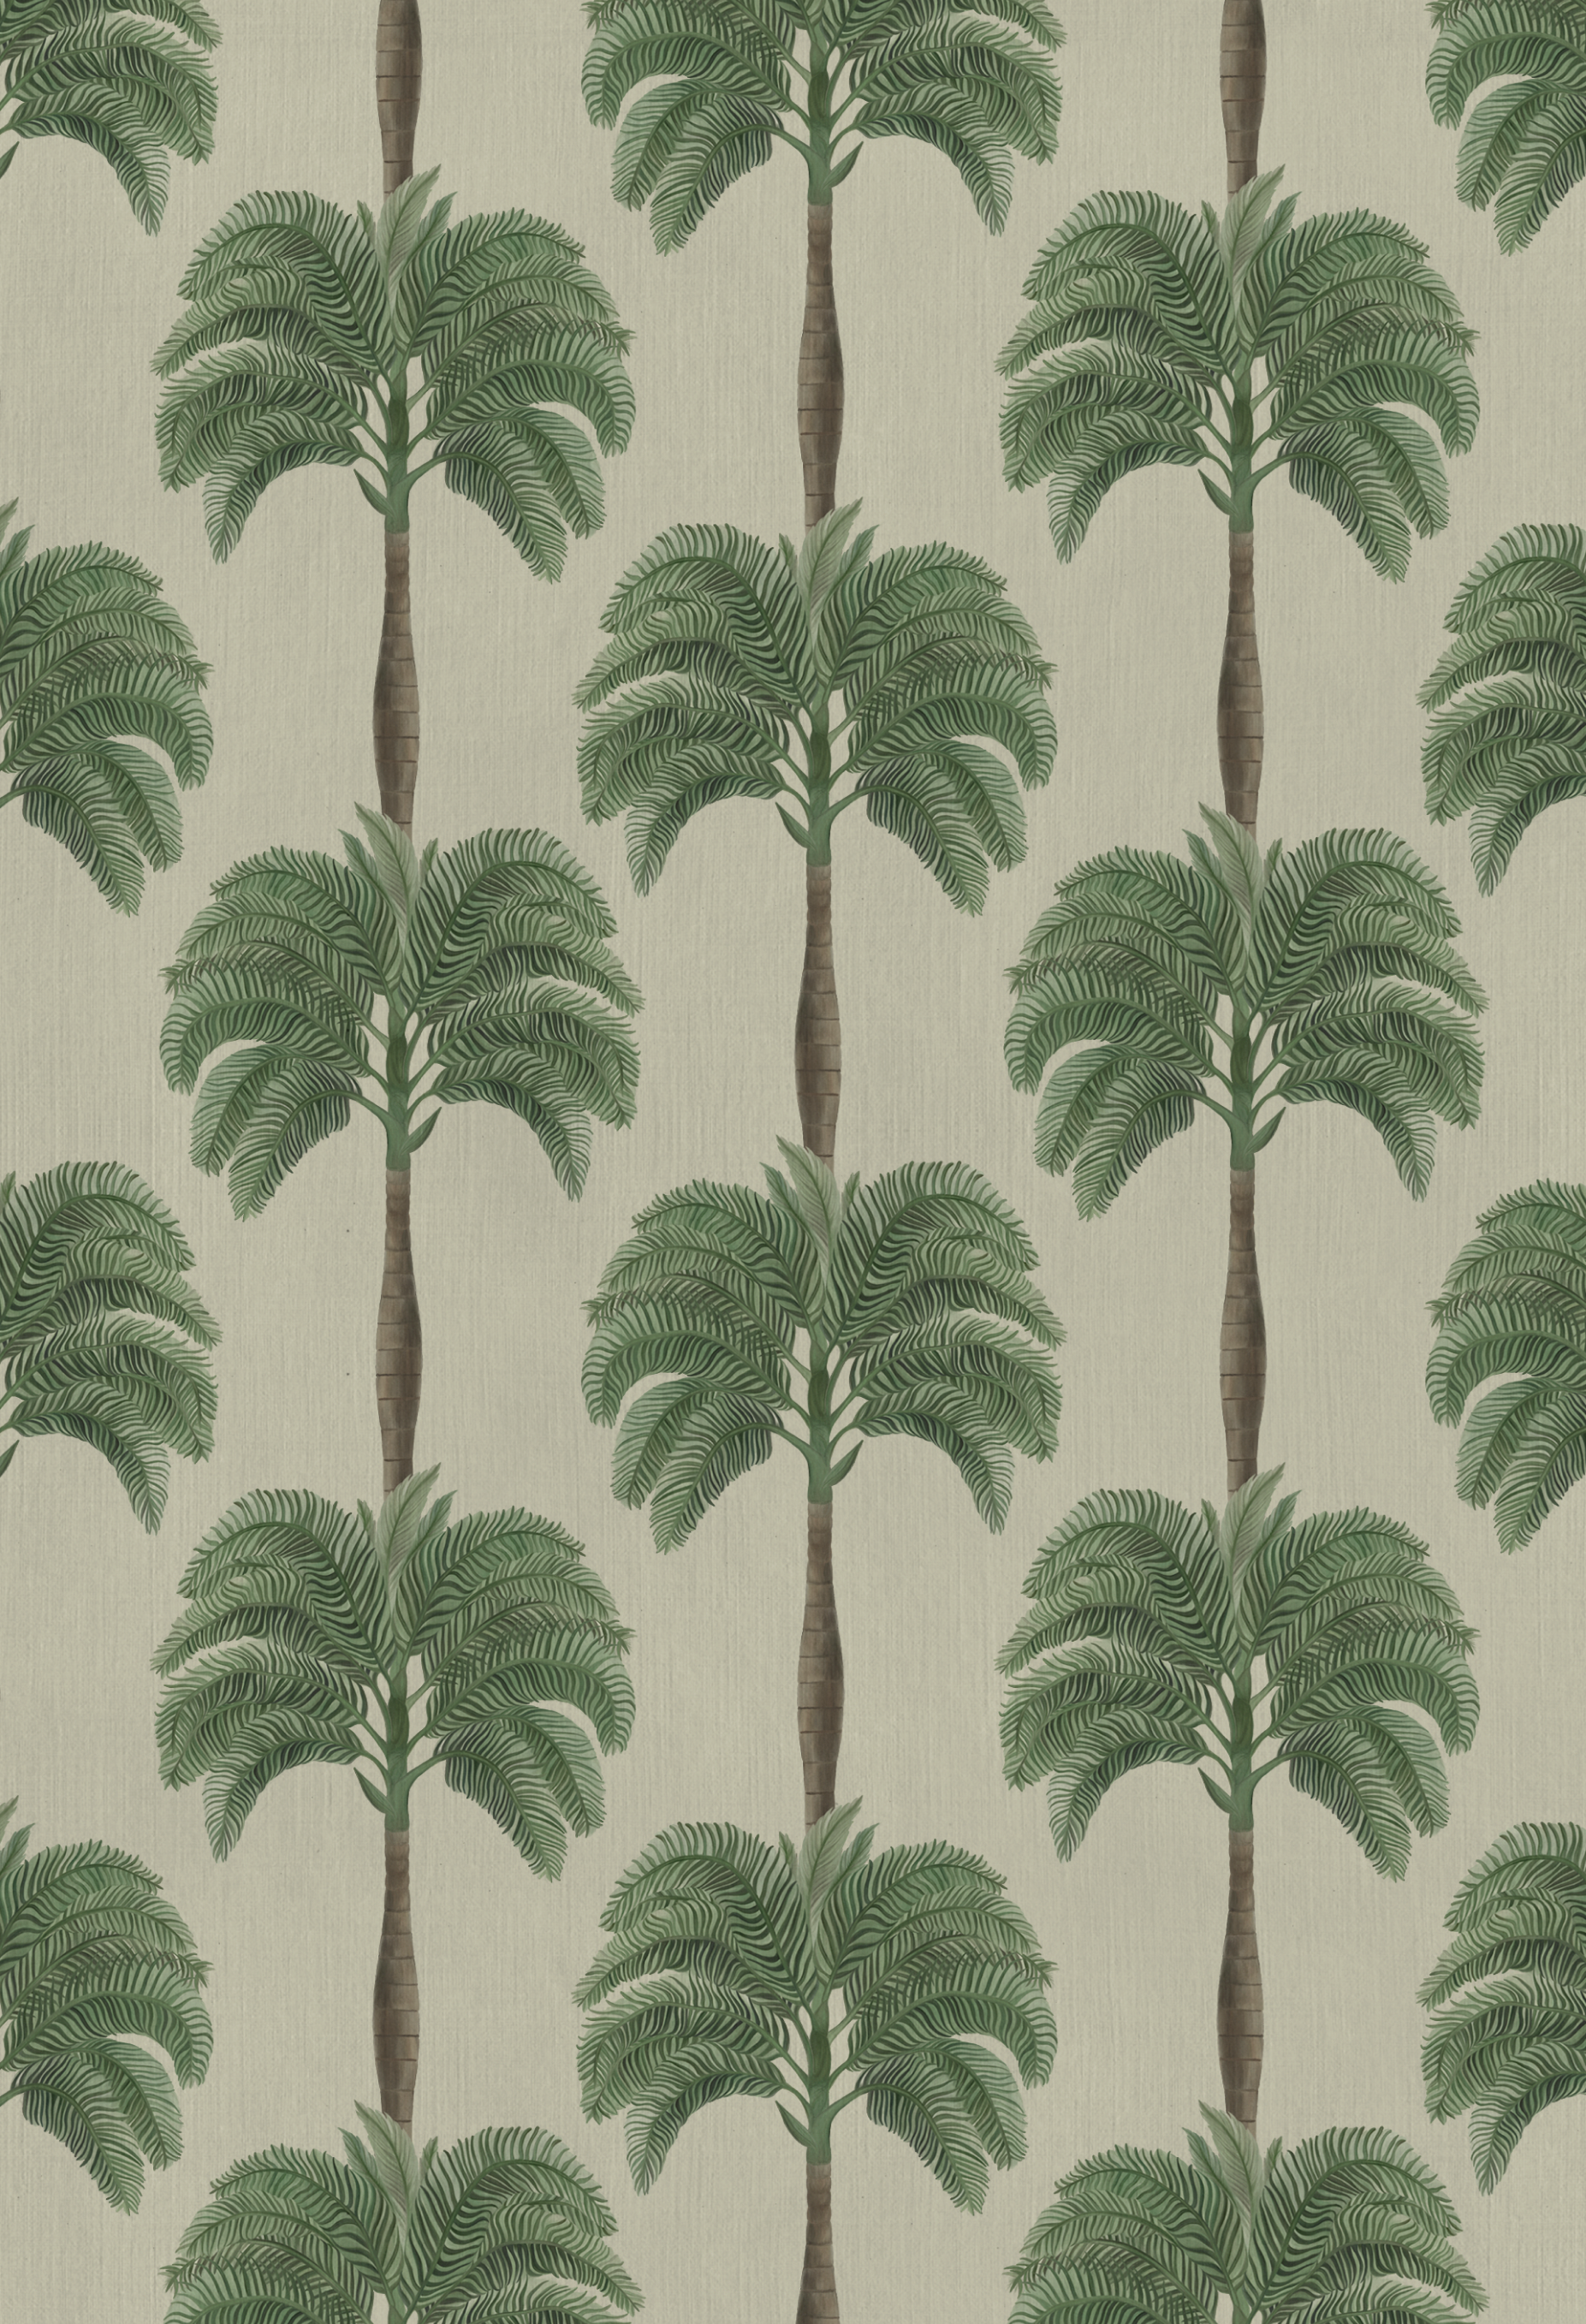 Botanical palm tree pattered paper on natural ground of the Little Palma Collection by Deus ex Gardenia.